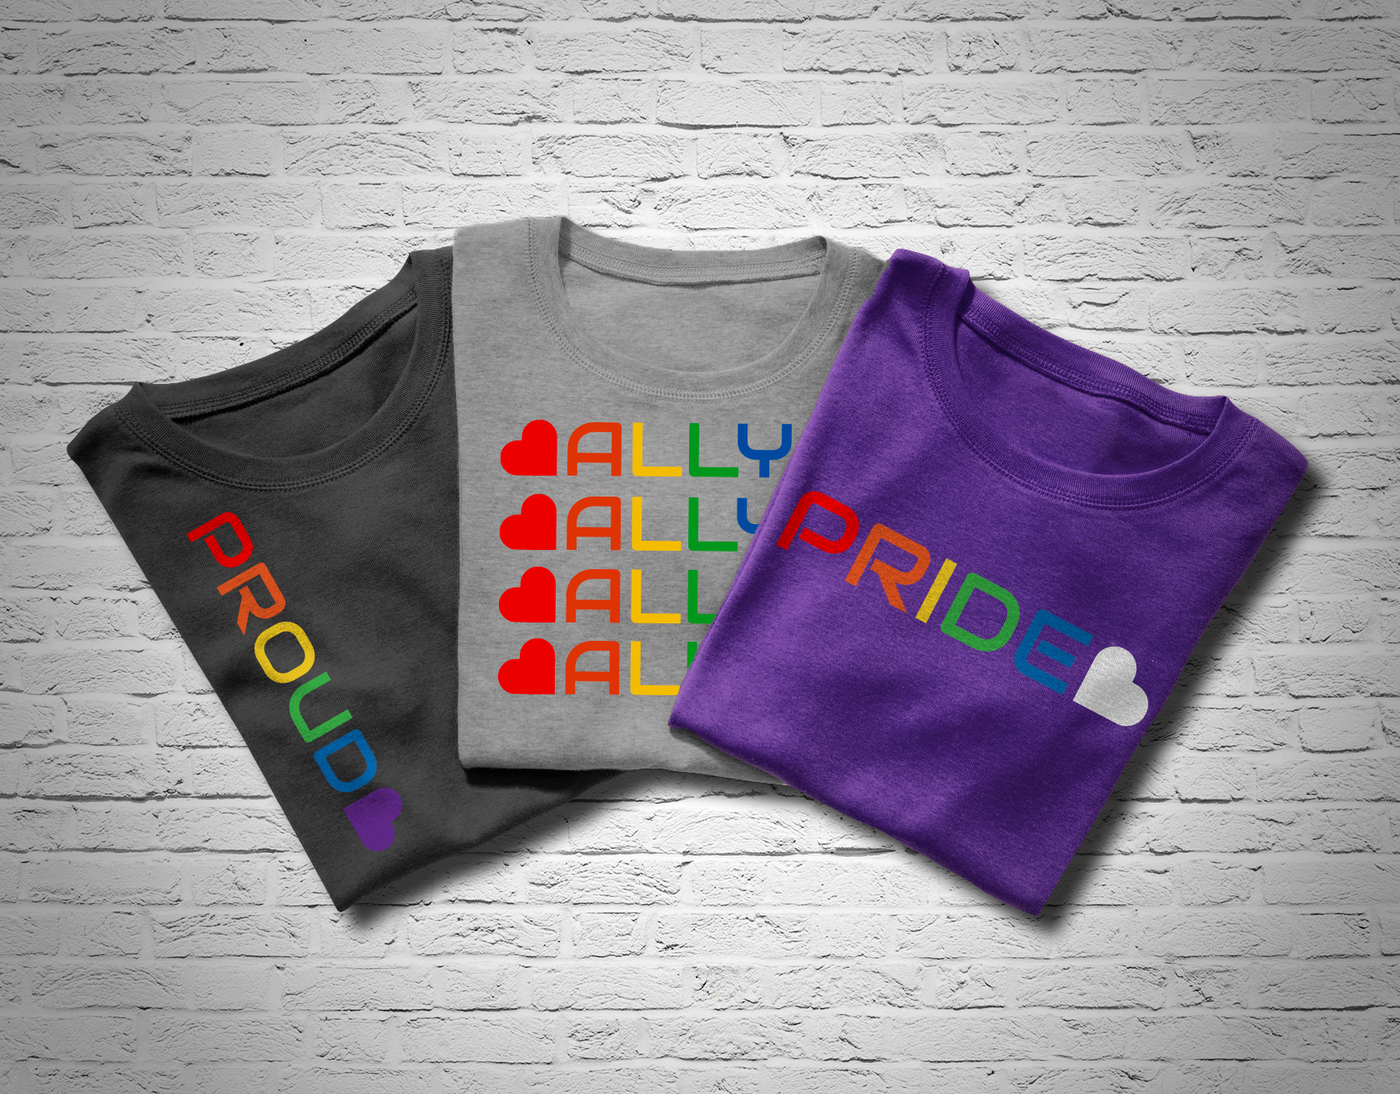 Rainbow color pride designs with the words "Proud," "Ally," and "Pride" with a heart.